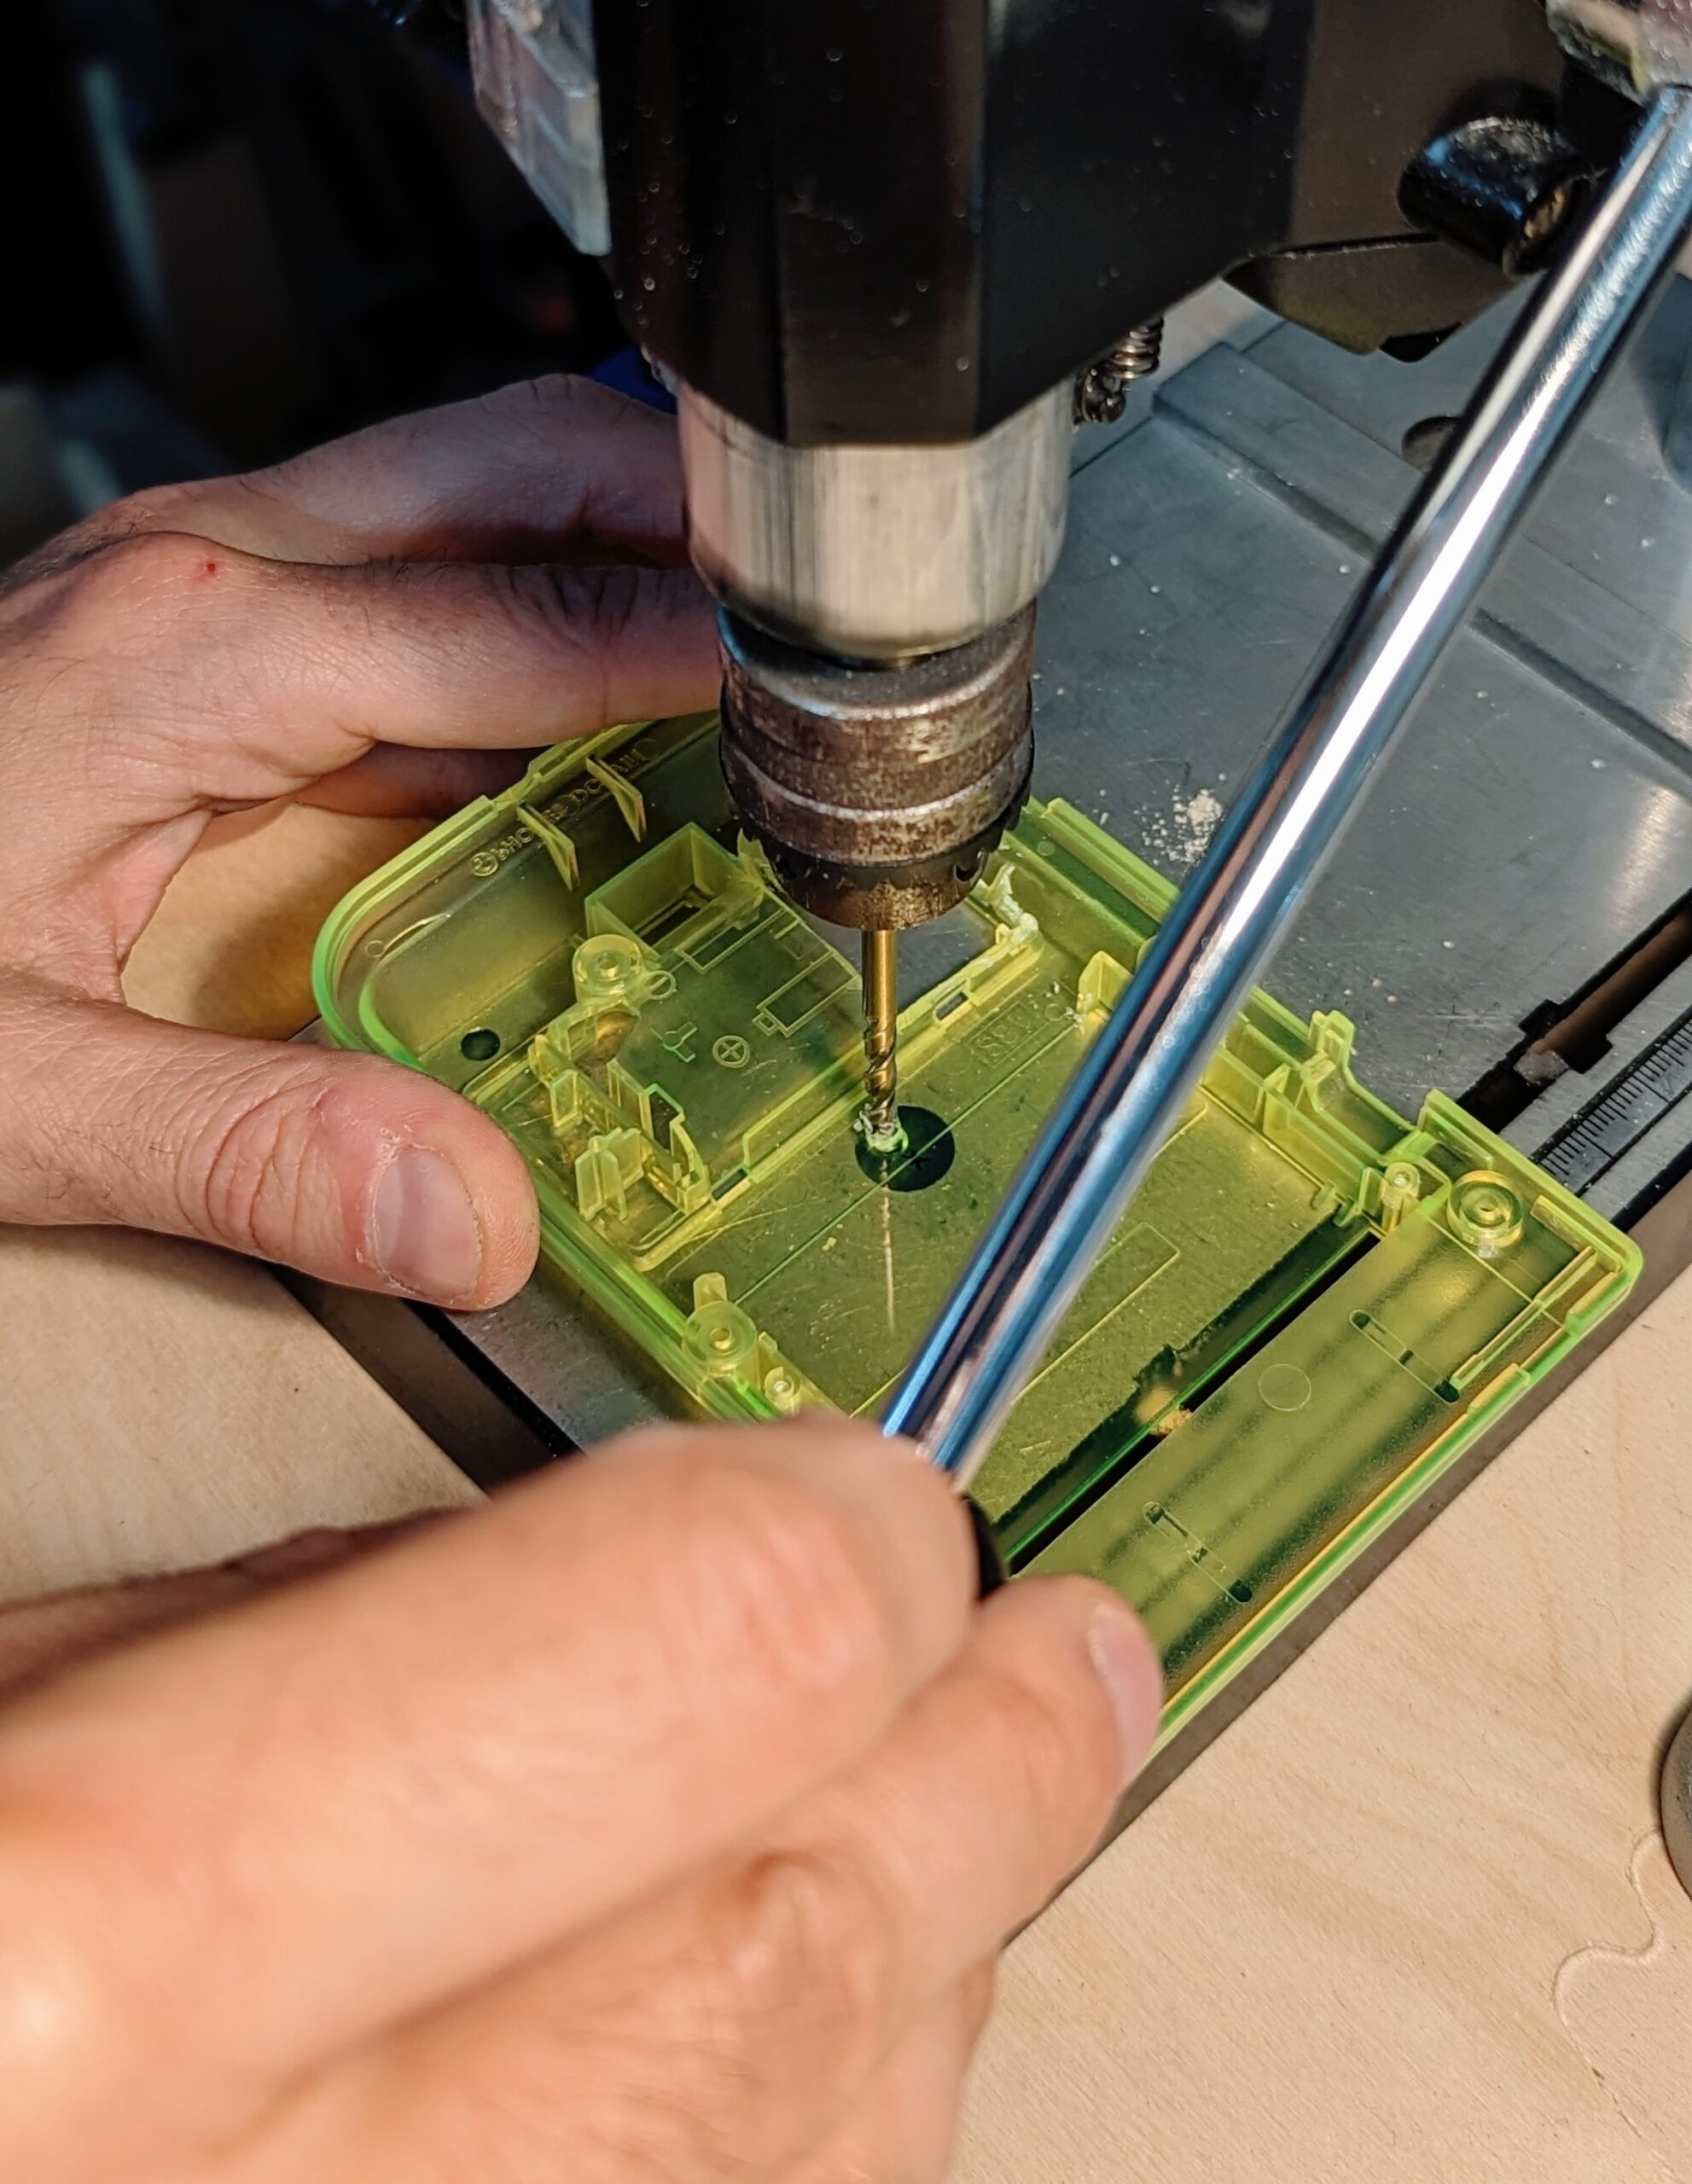 a game boy pocket shell is held under a drill press, which has just drilled a hole through it